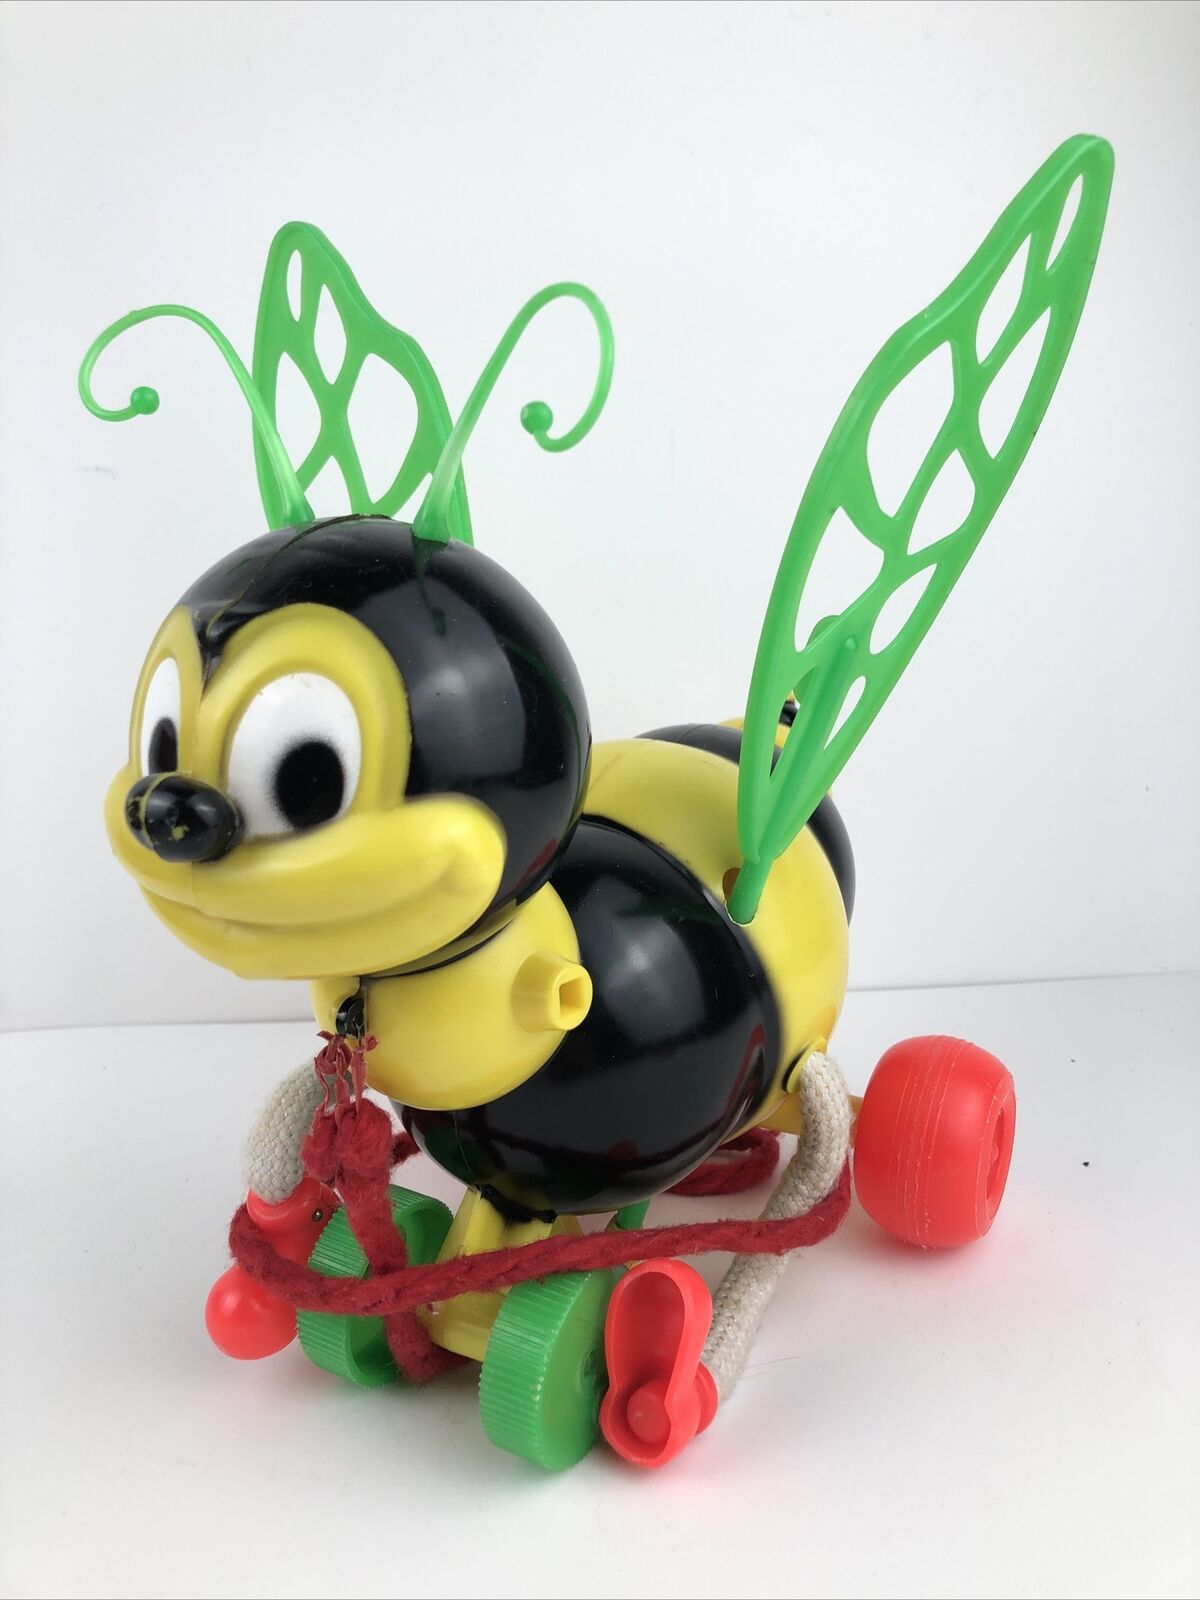 Vintage Kusan Bumble Bee Pull Toy